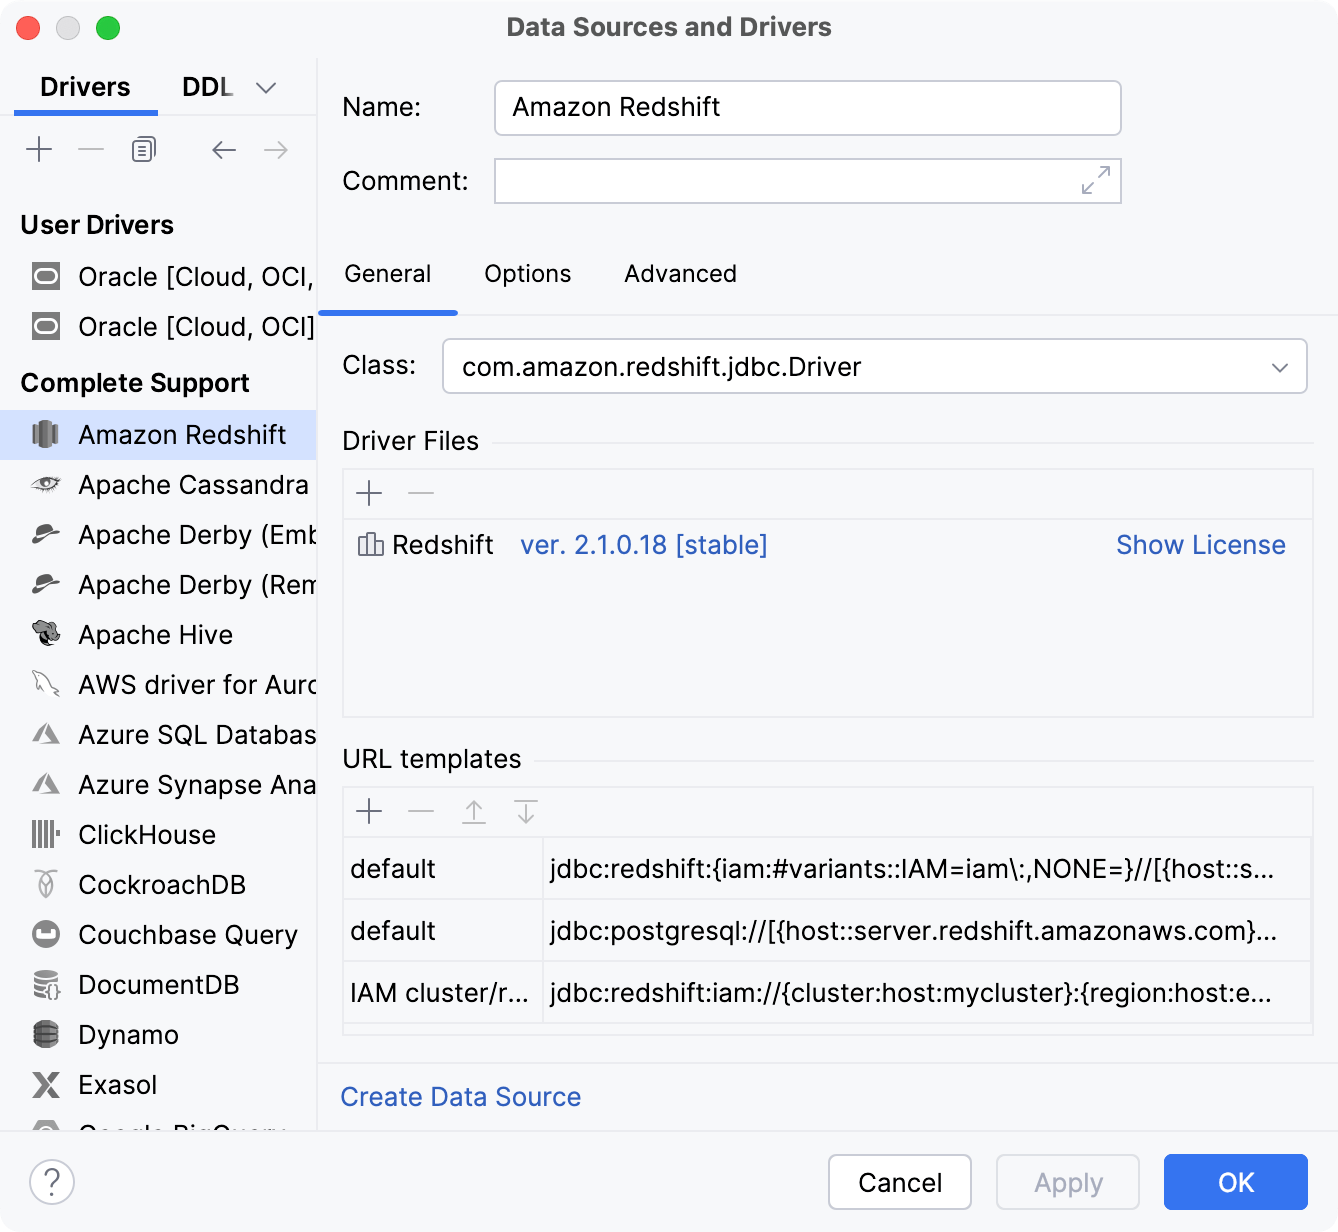 Data Source and Drivers dialog: General tab of Drivers settings